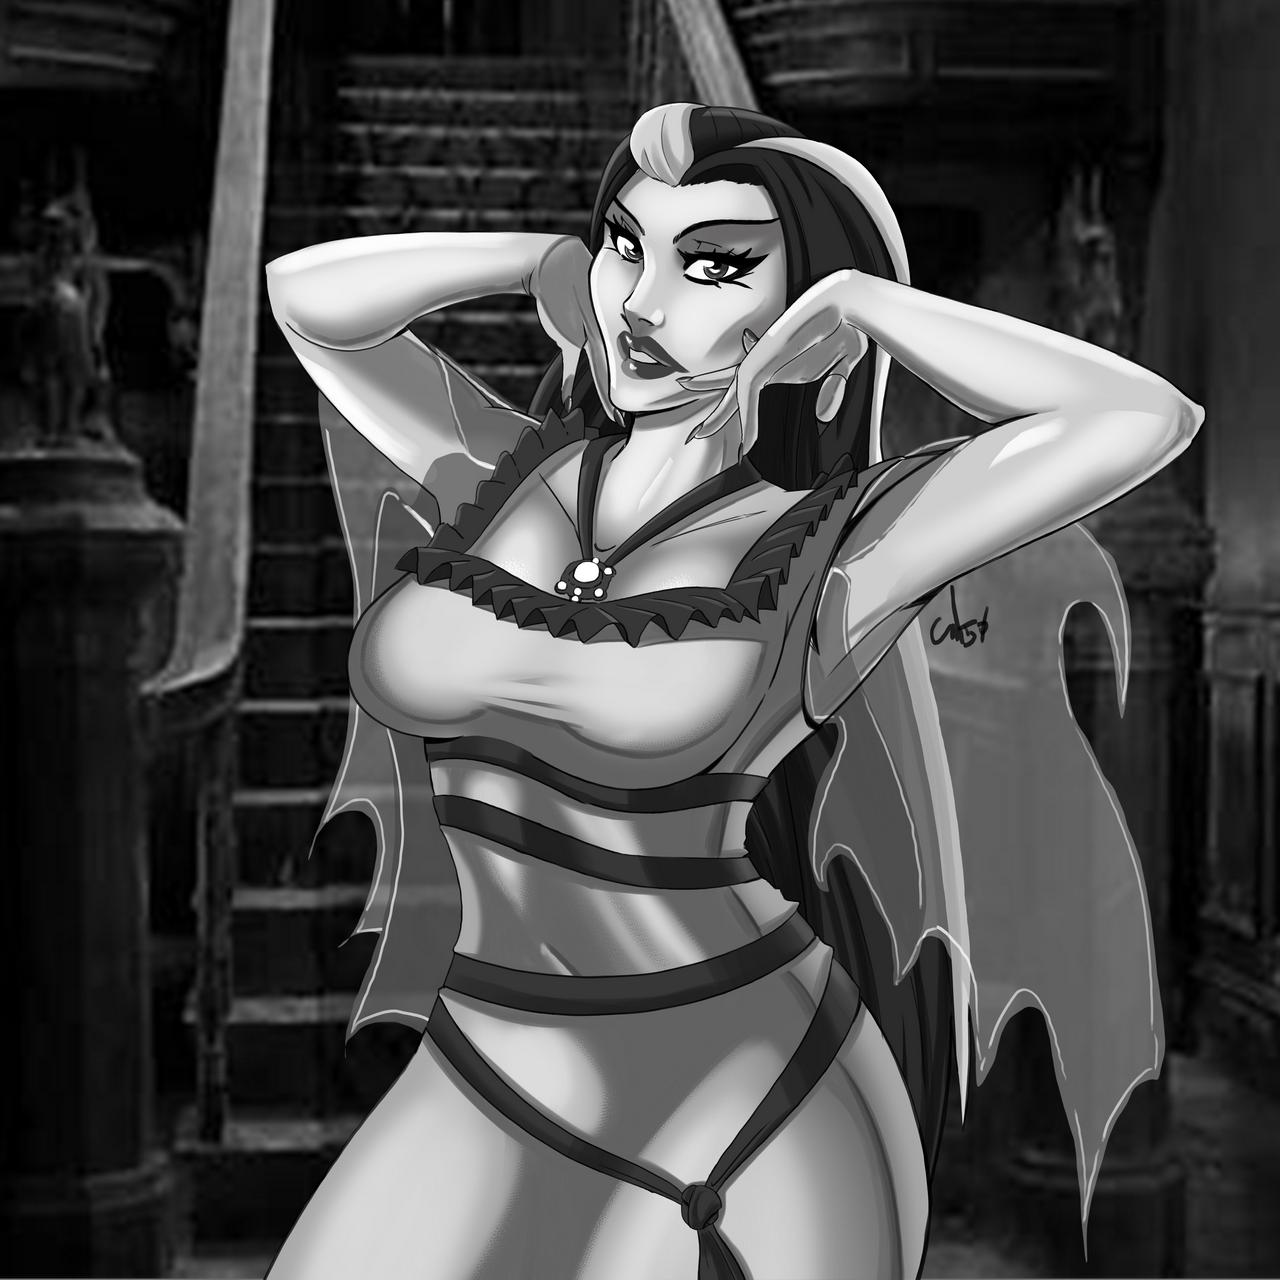 Lily Munster From The Munsters By Fiftycalvinar